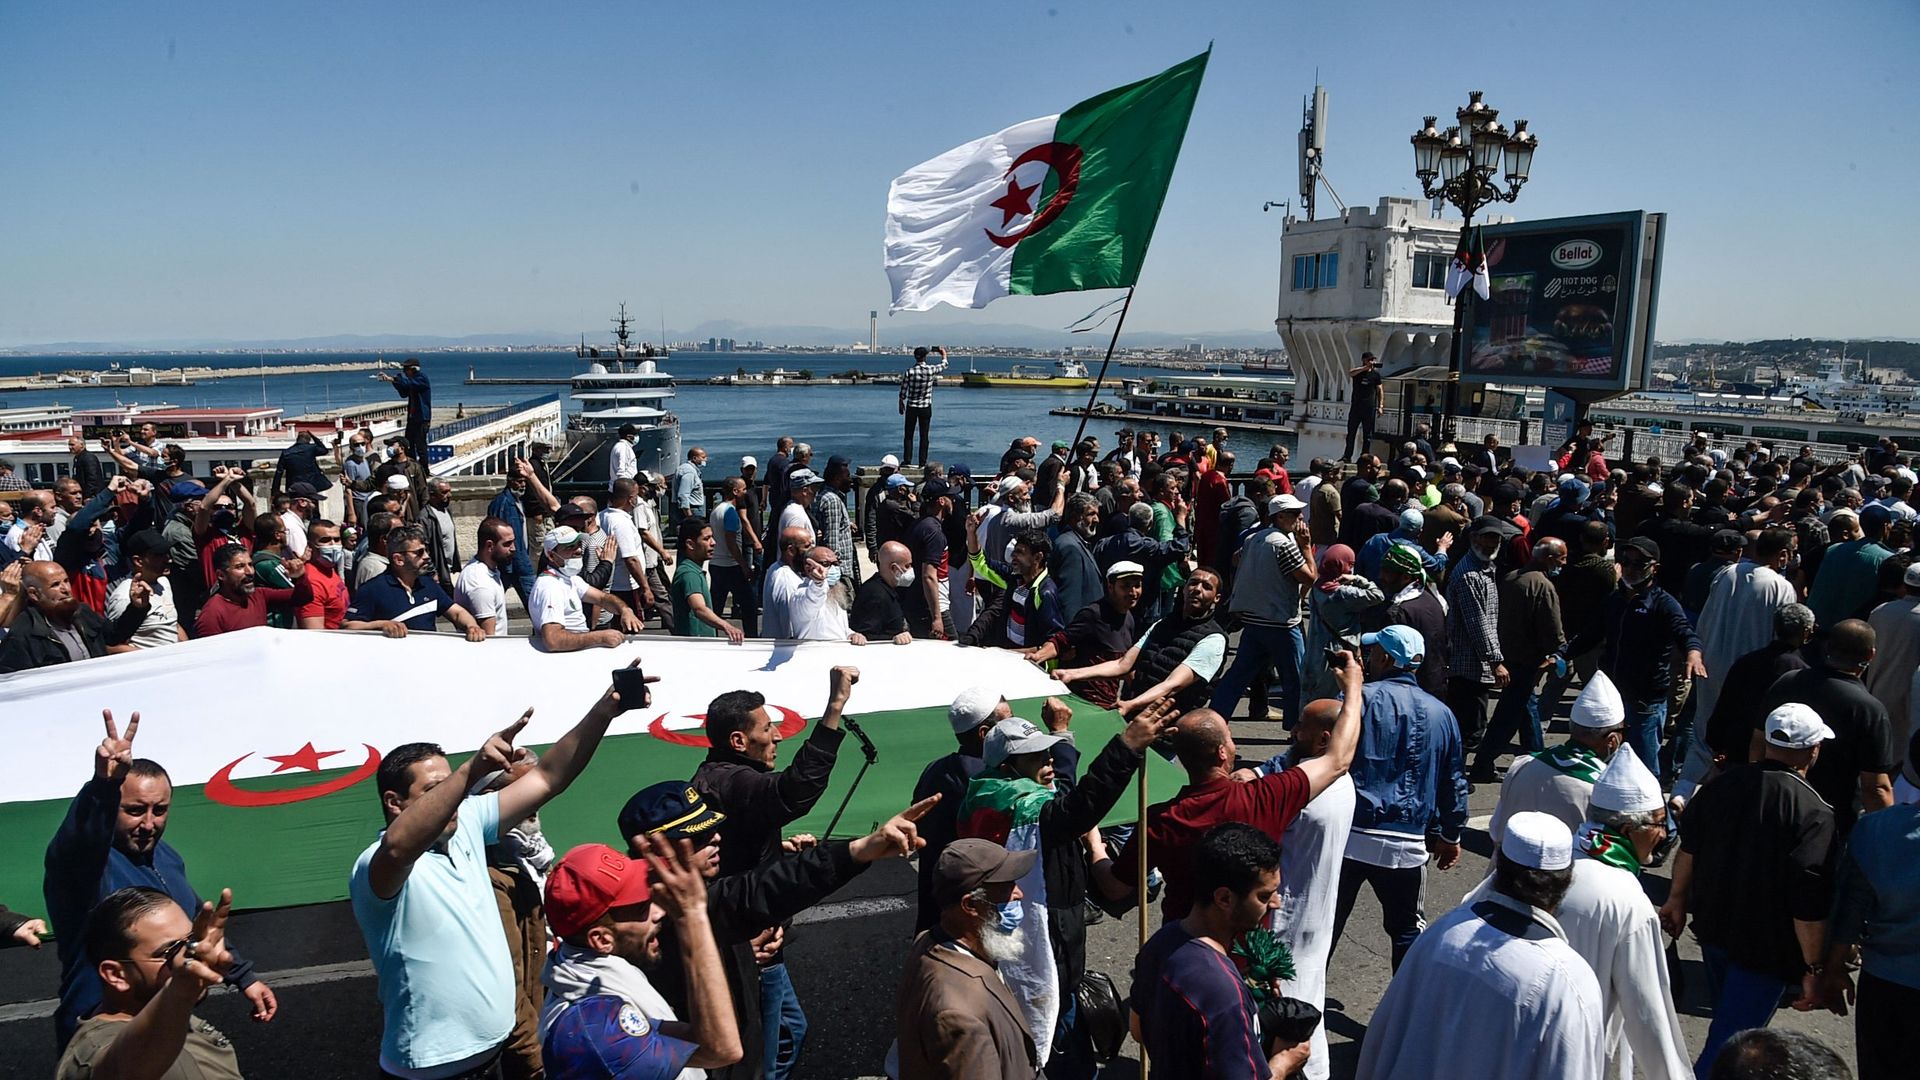 Algerians shout slogans during an anti-government demonstration in the capital Algiers on May 7, 2021